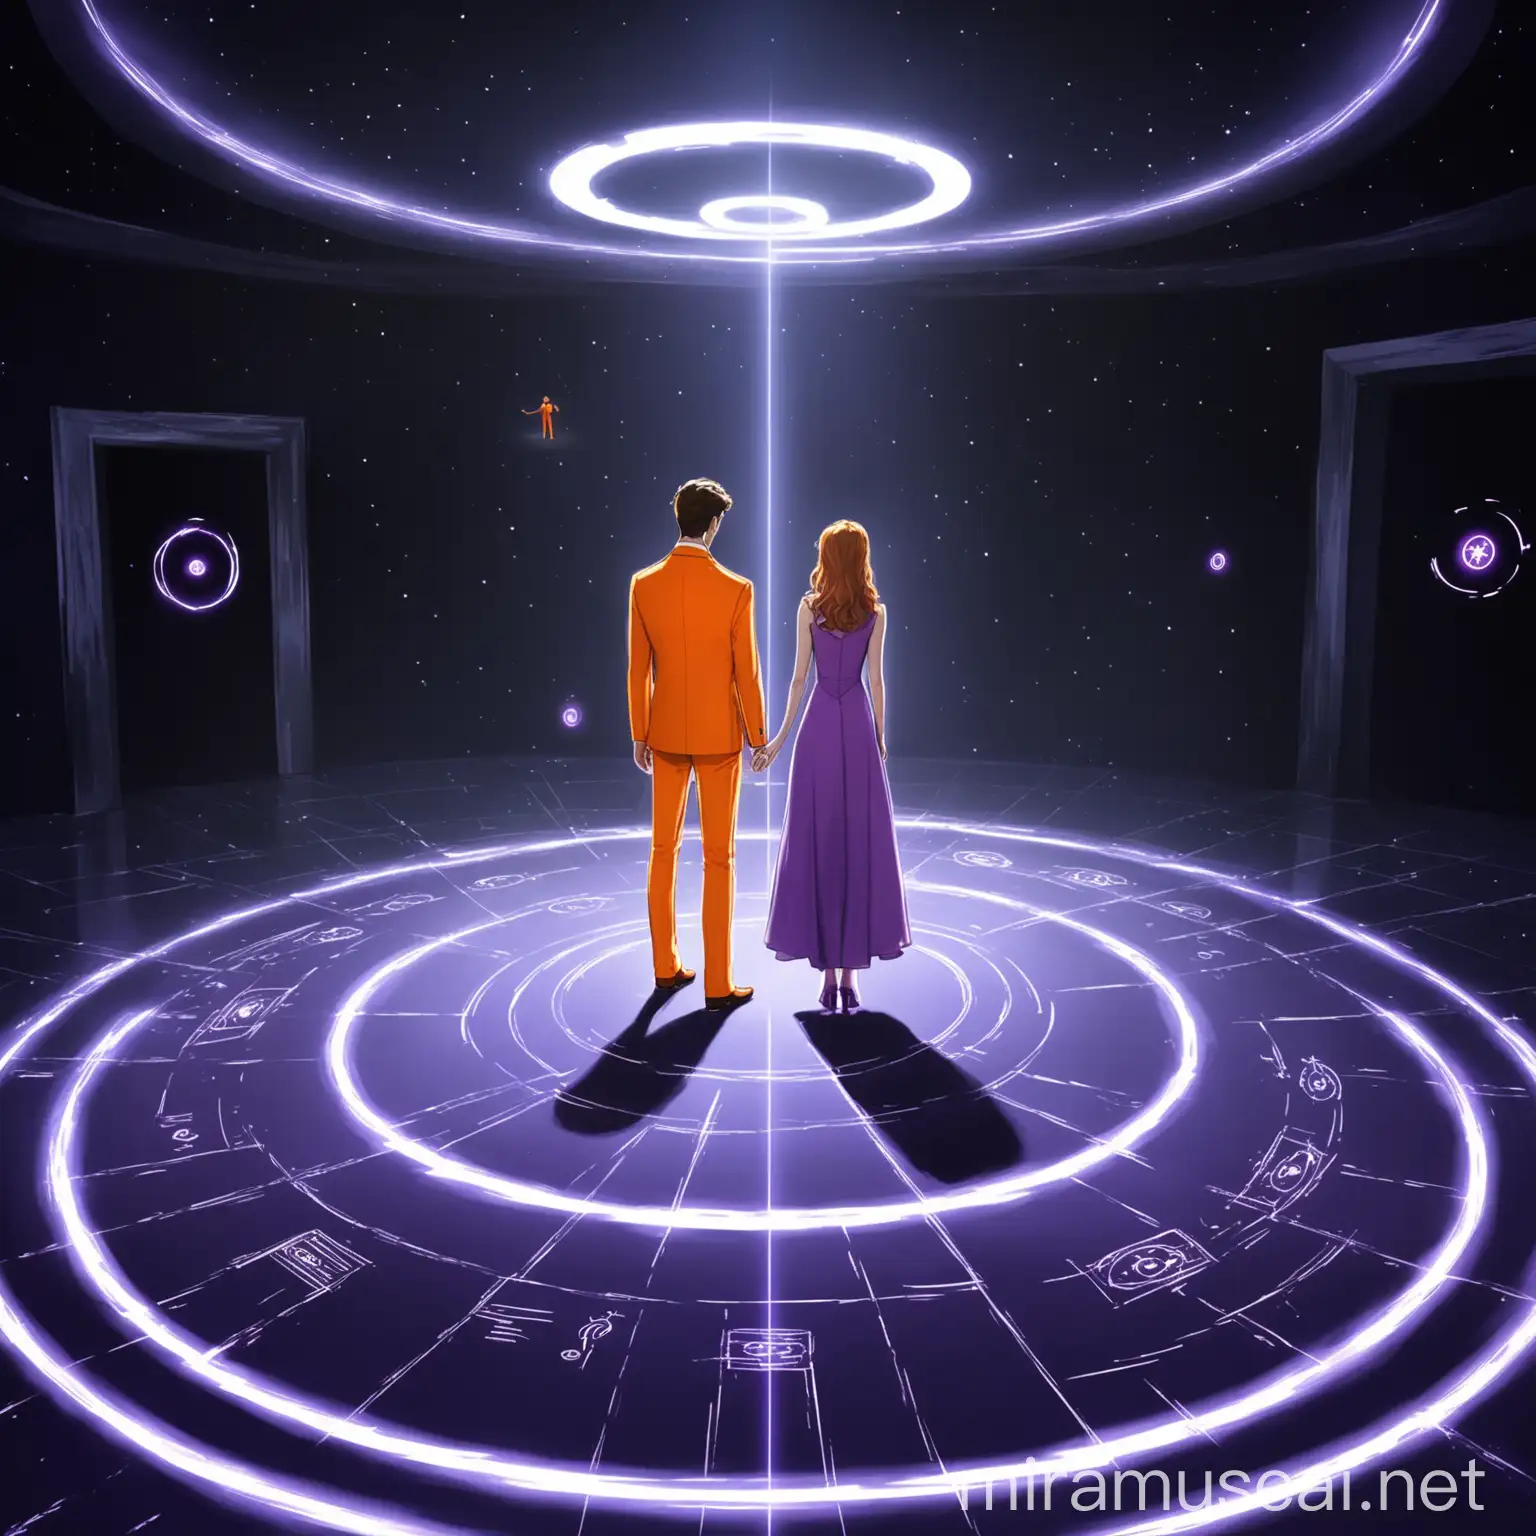 There is a handsome man in his 20s in an orange suit and a beautiful woman in his 20s in a purple dress.
They stand where a circle is drawn on the floor. White light is emitted from the ceiling.
The atmosphere in the background is a place to teleport.